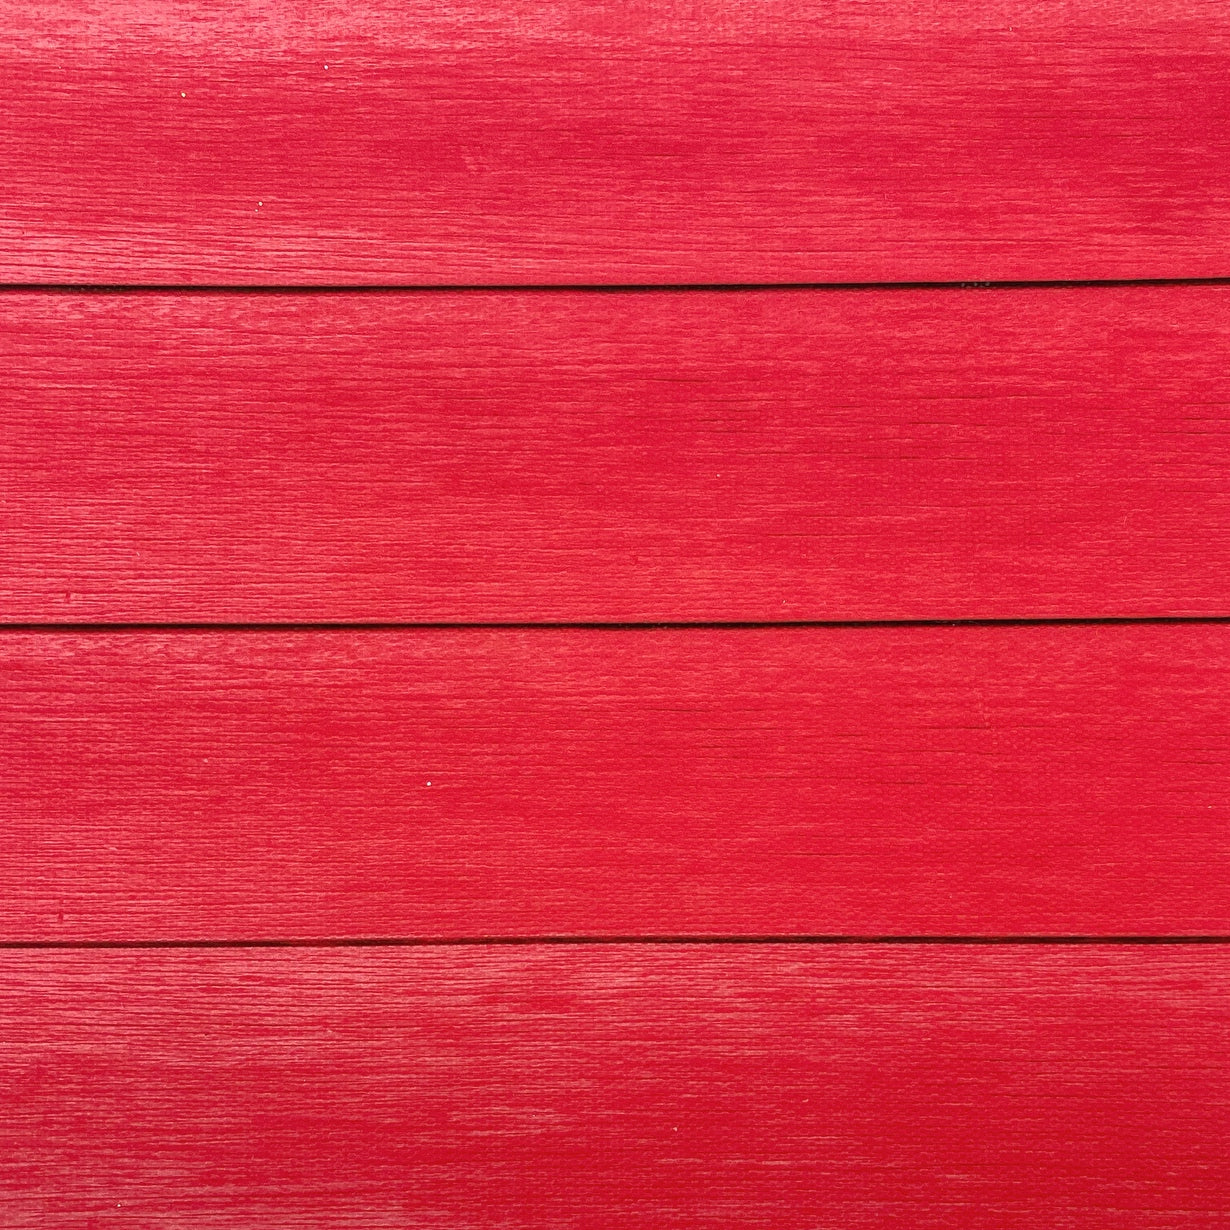 Red Wood Canvas Photography Background